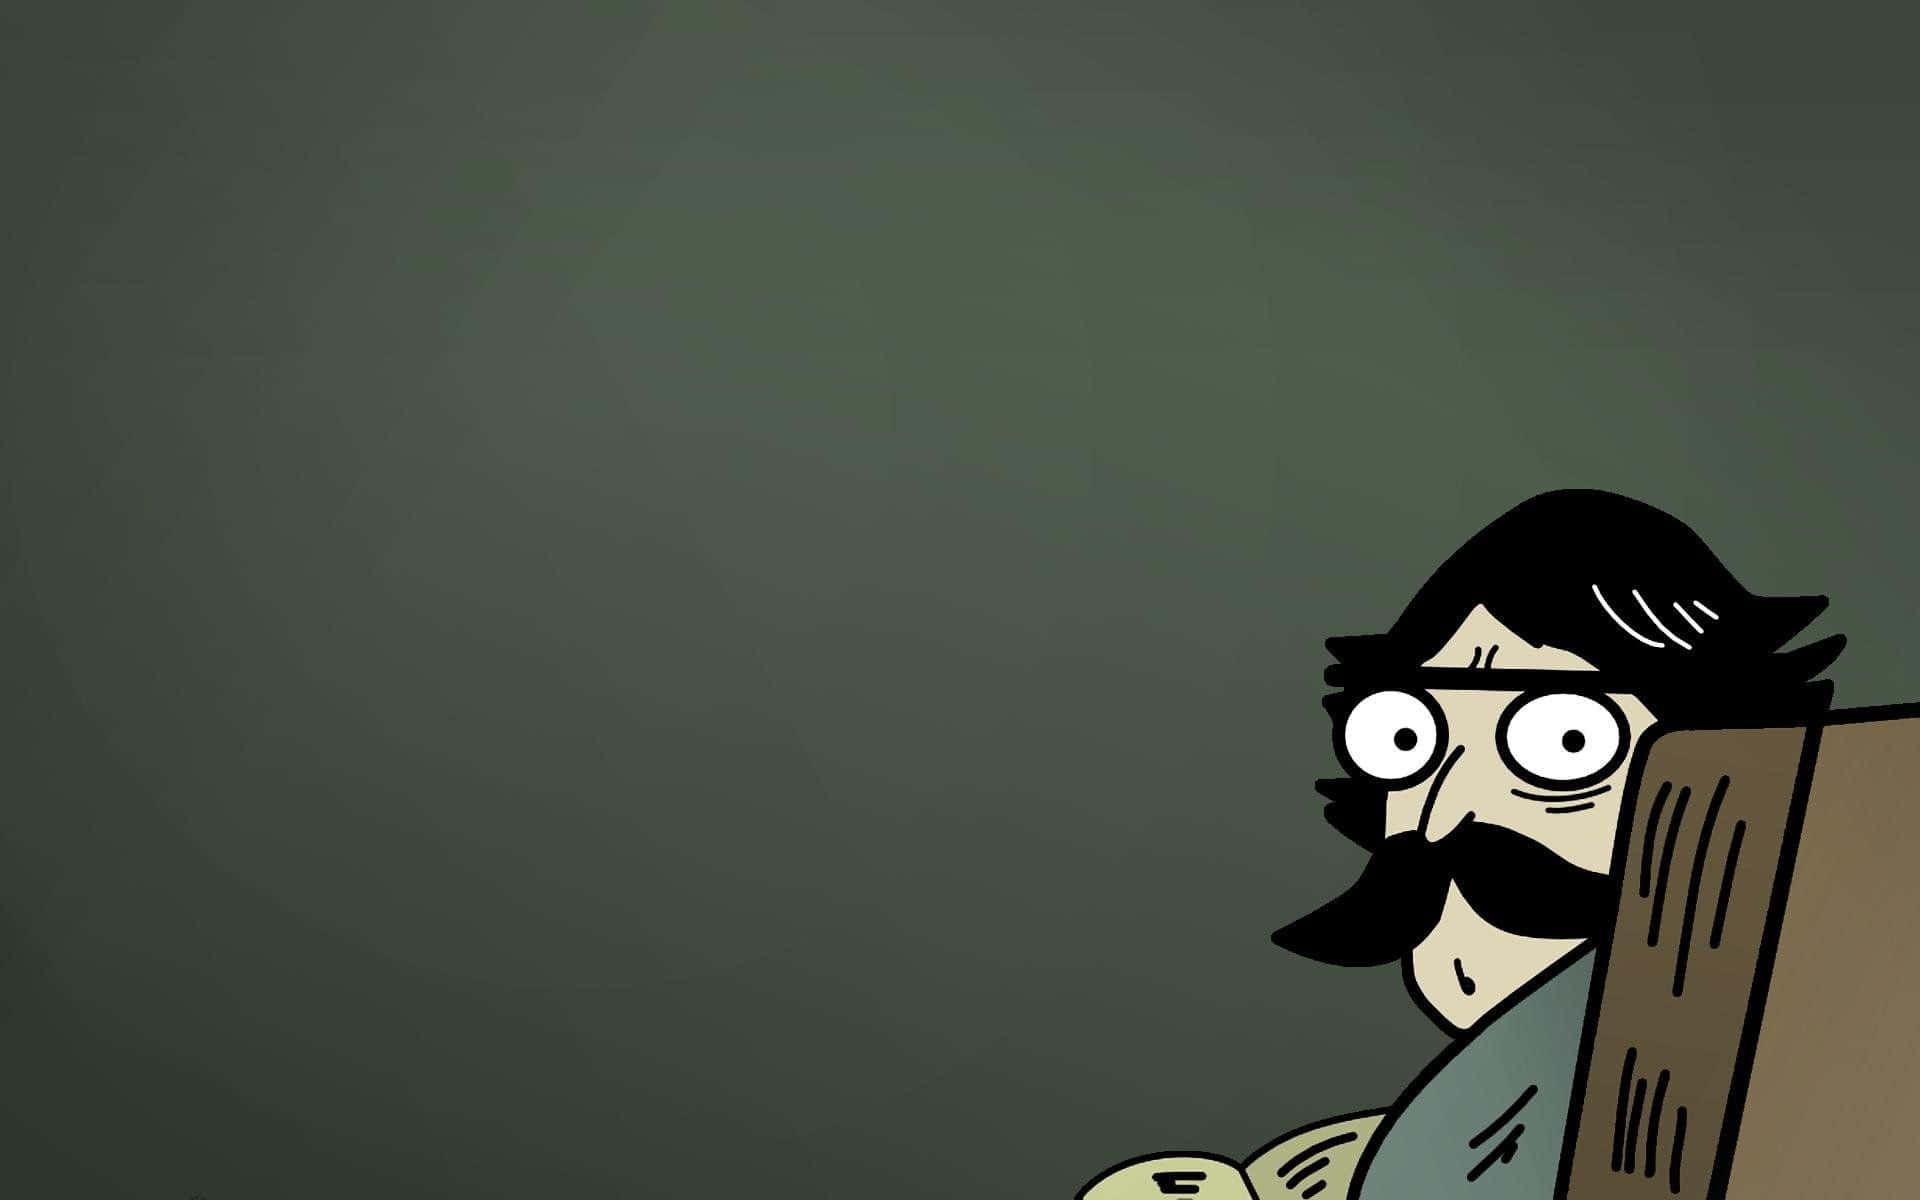 A Cartoon Man With A Mustache And Glasses Sitting In Front Of A Blackboard Wallpaper